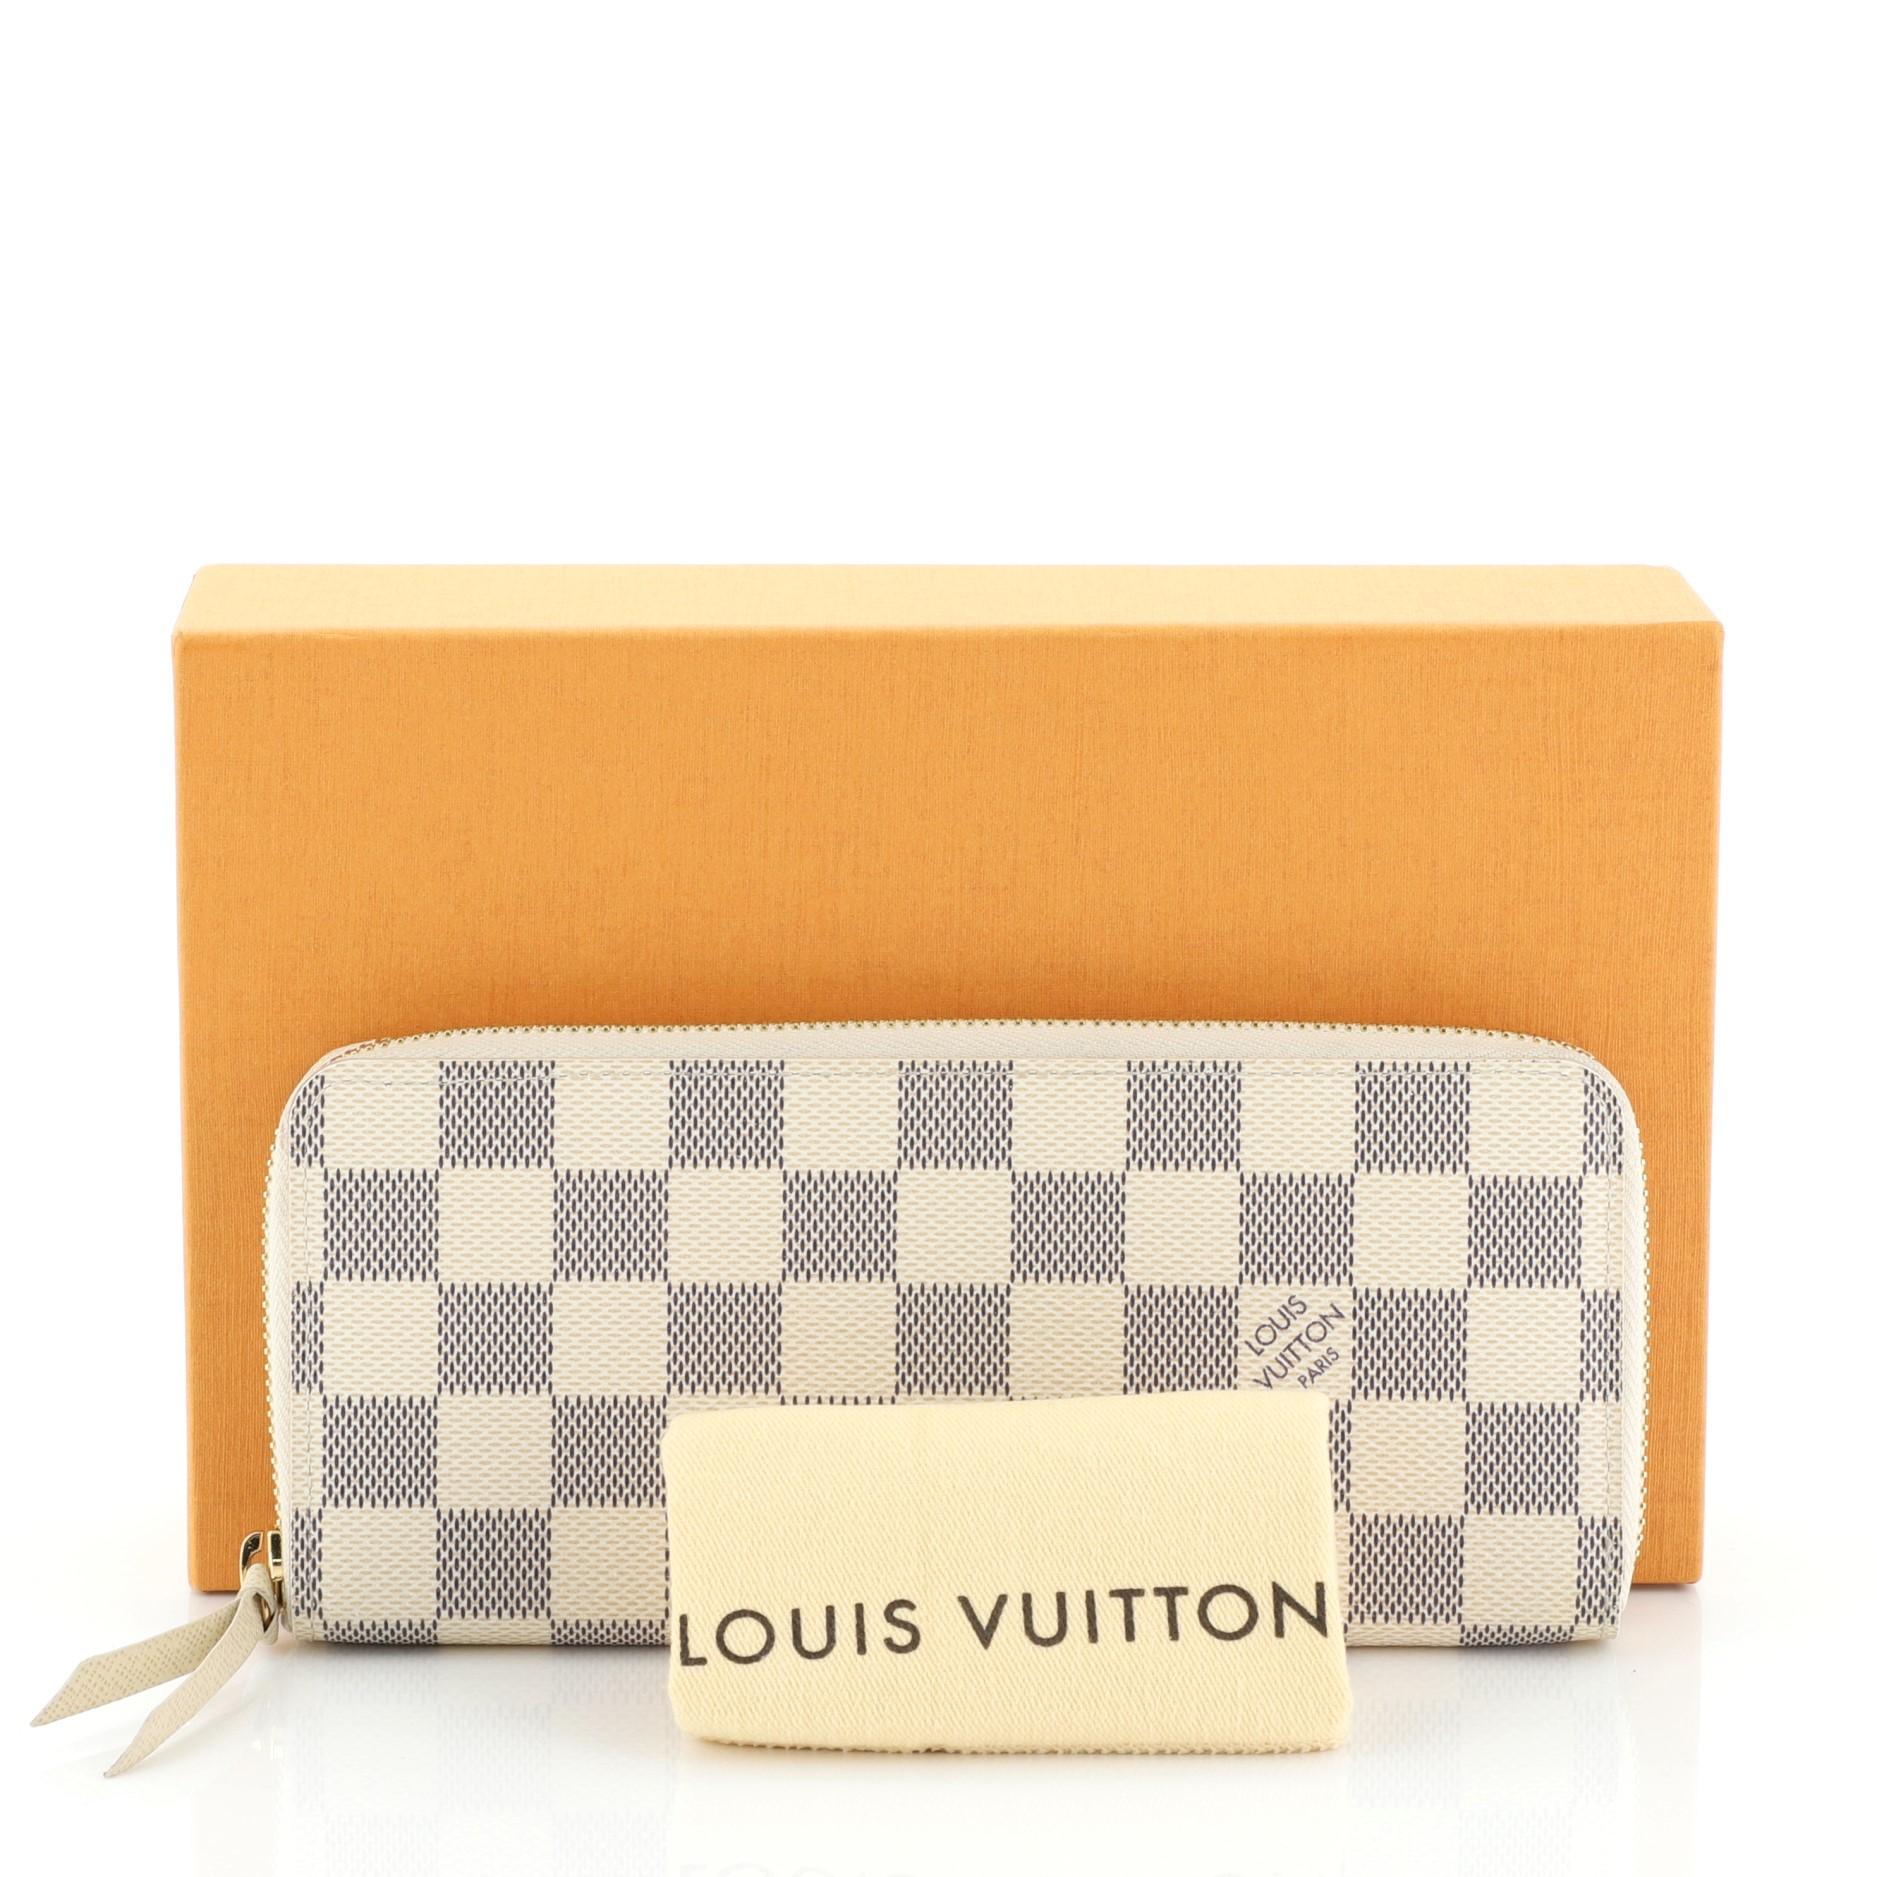 This Louis Vuitton Clemence Wallet Damier is an everyday piece with damier pattern introduced in 1888, from the French word which literally translates to Checker Board. Crafted from damier azur coated canvas, it features gold-tone hardware. Its